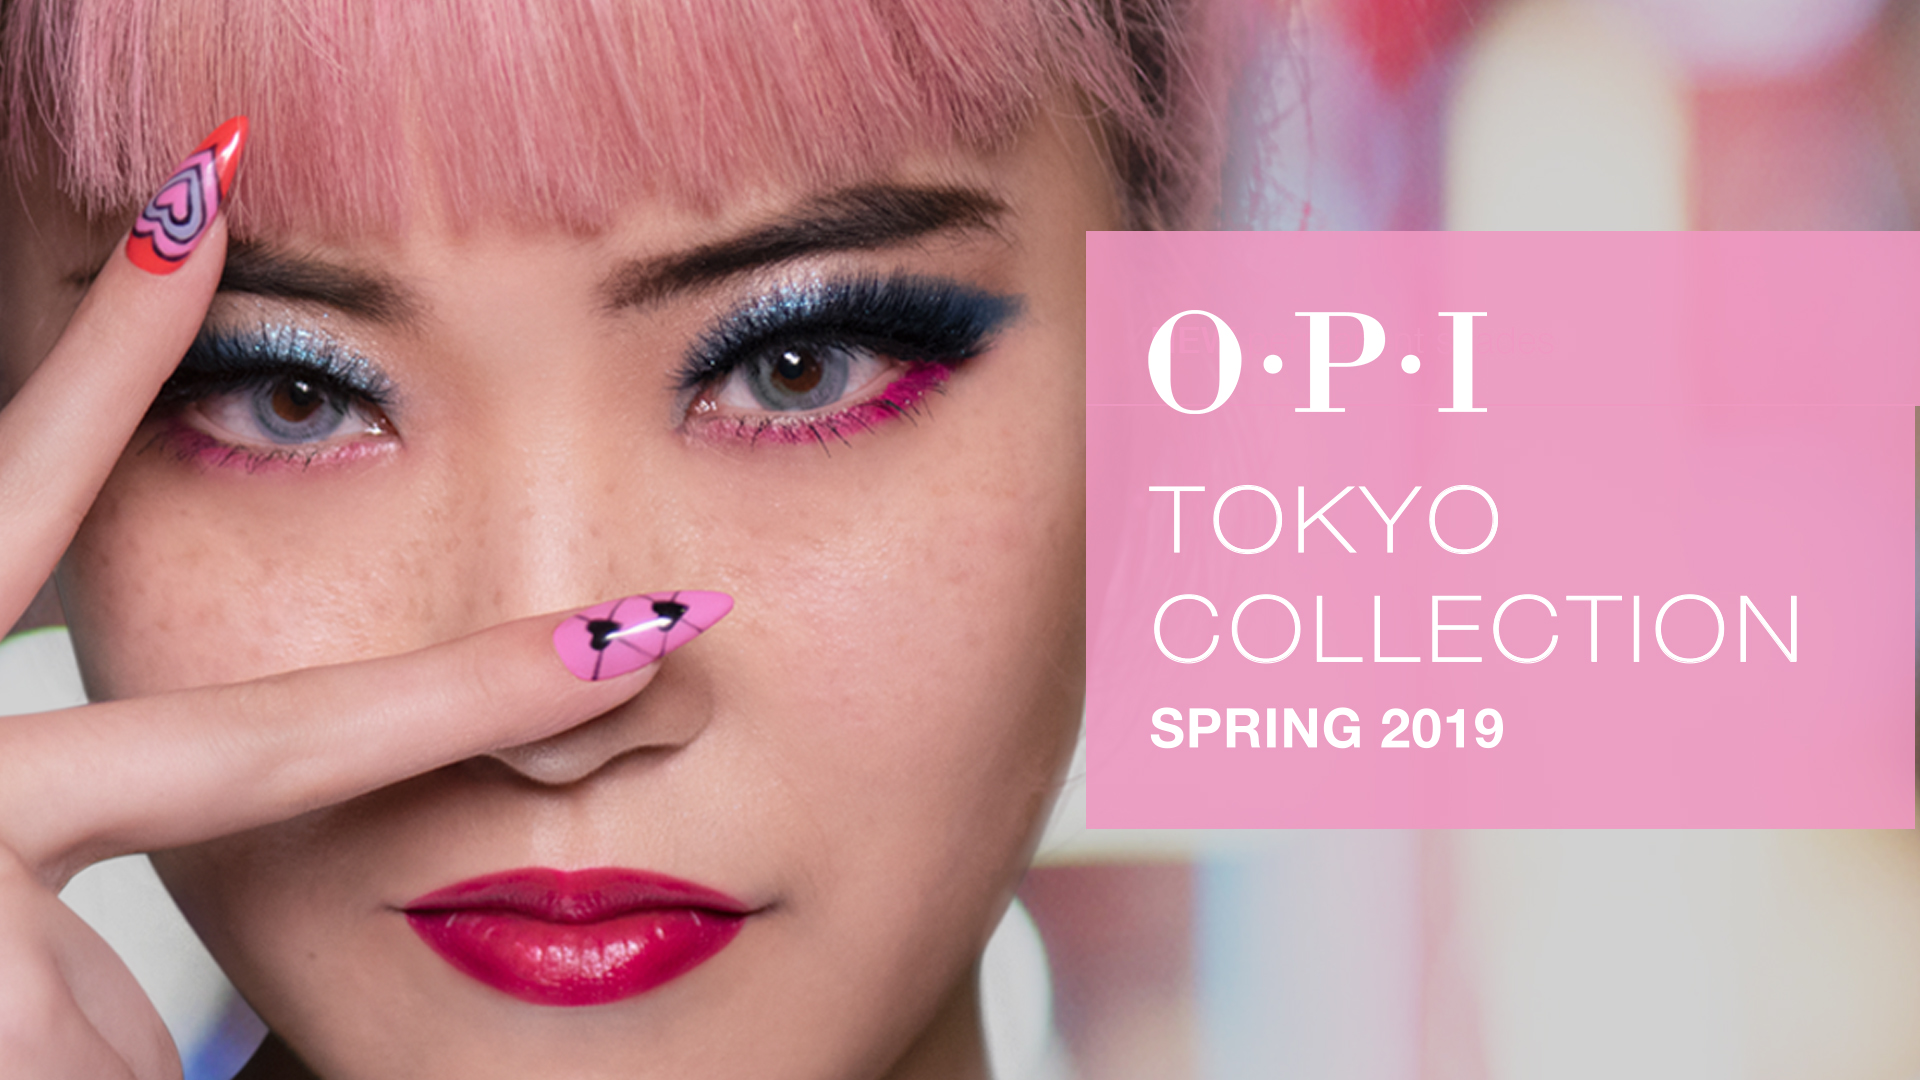 OPI Tokyo Collection